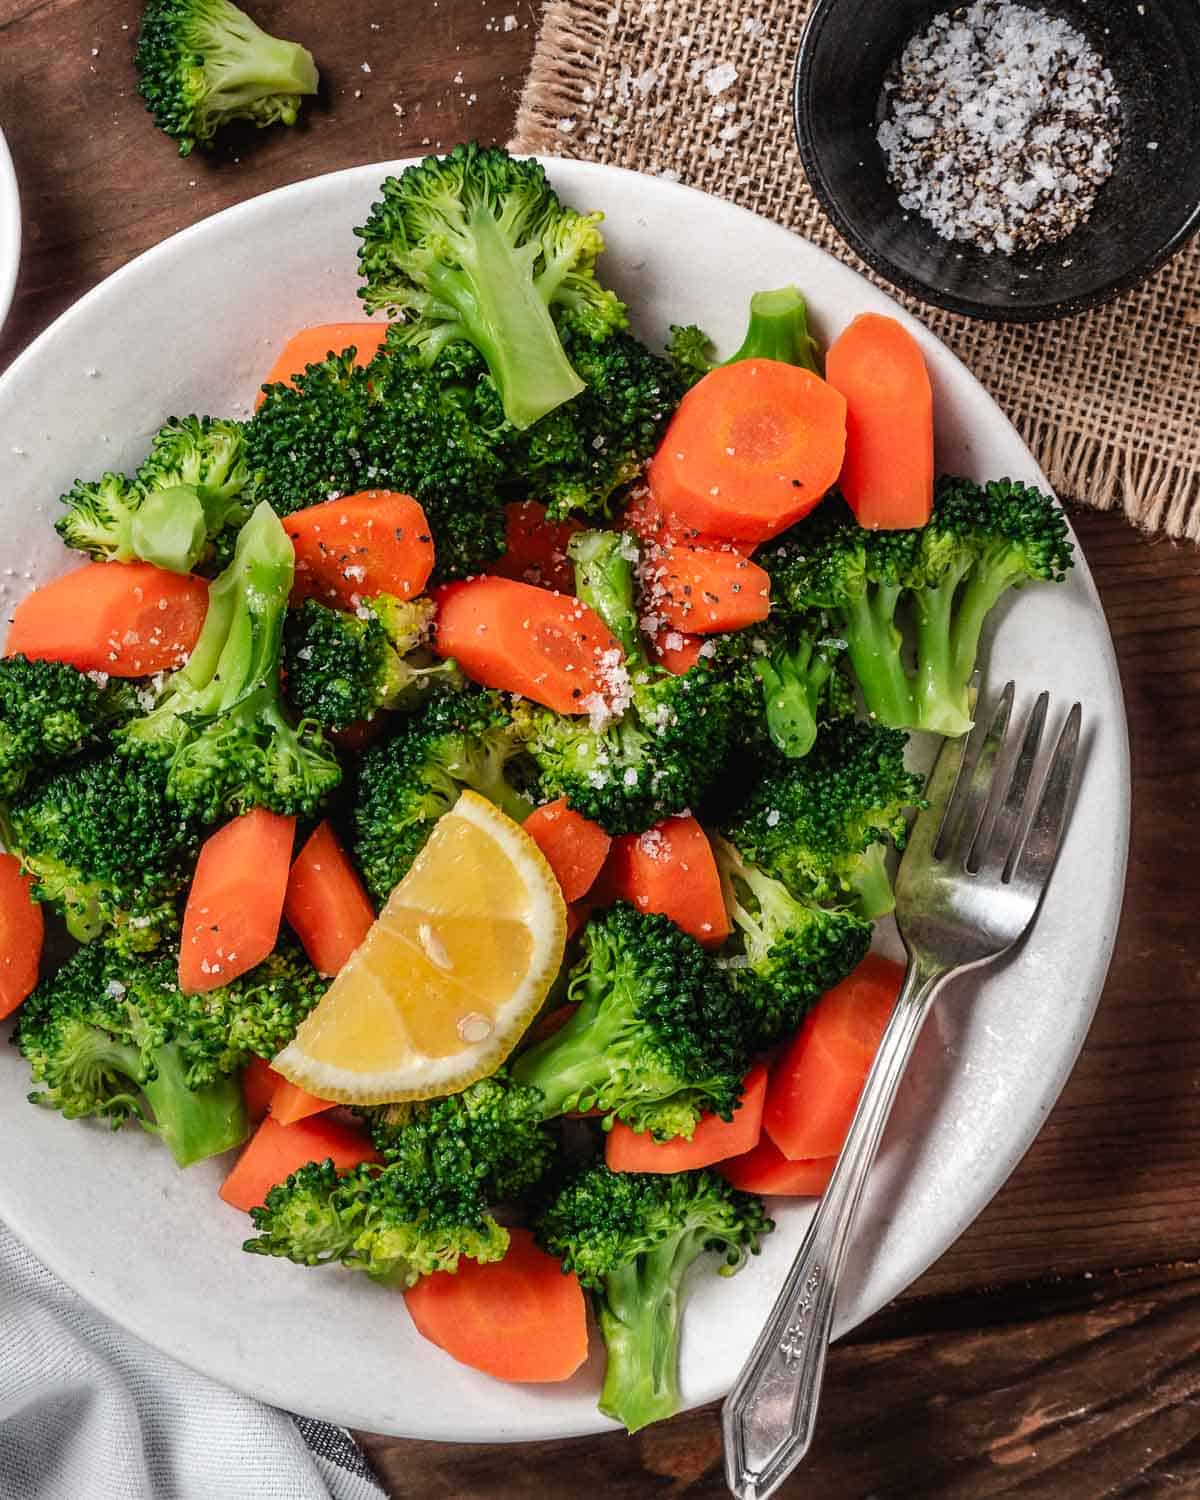 Cooked broccoli and carrots on a plate with a lemon wedge.